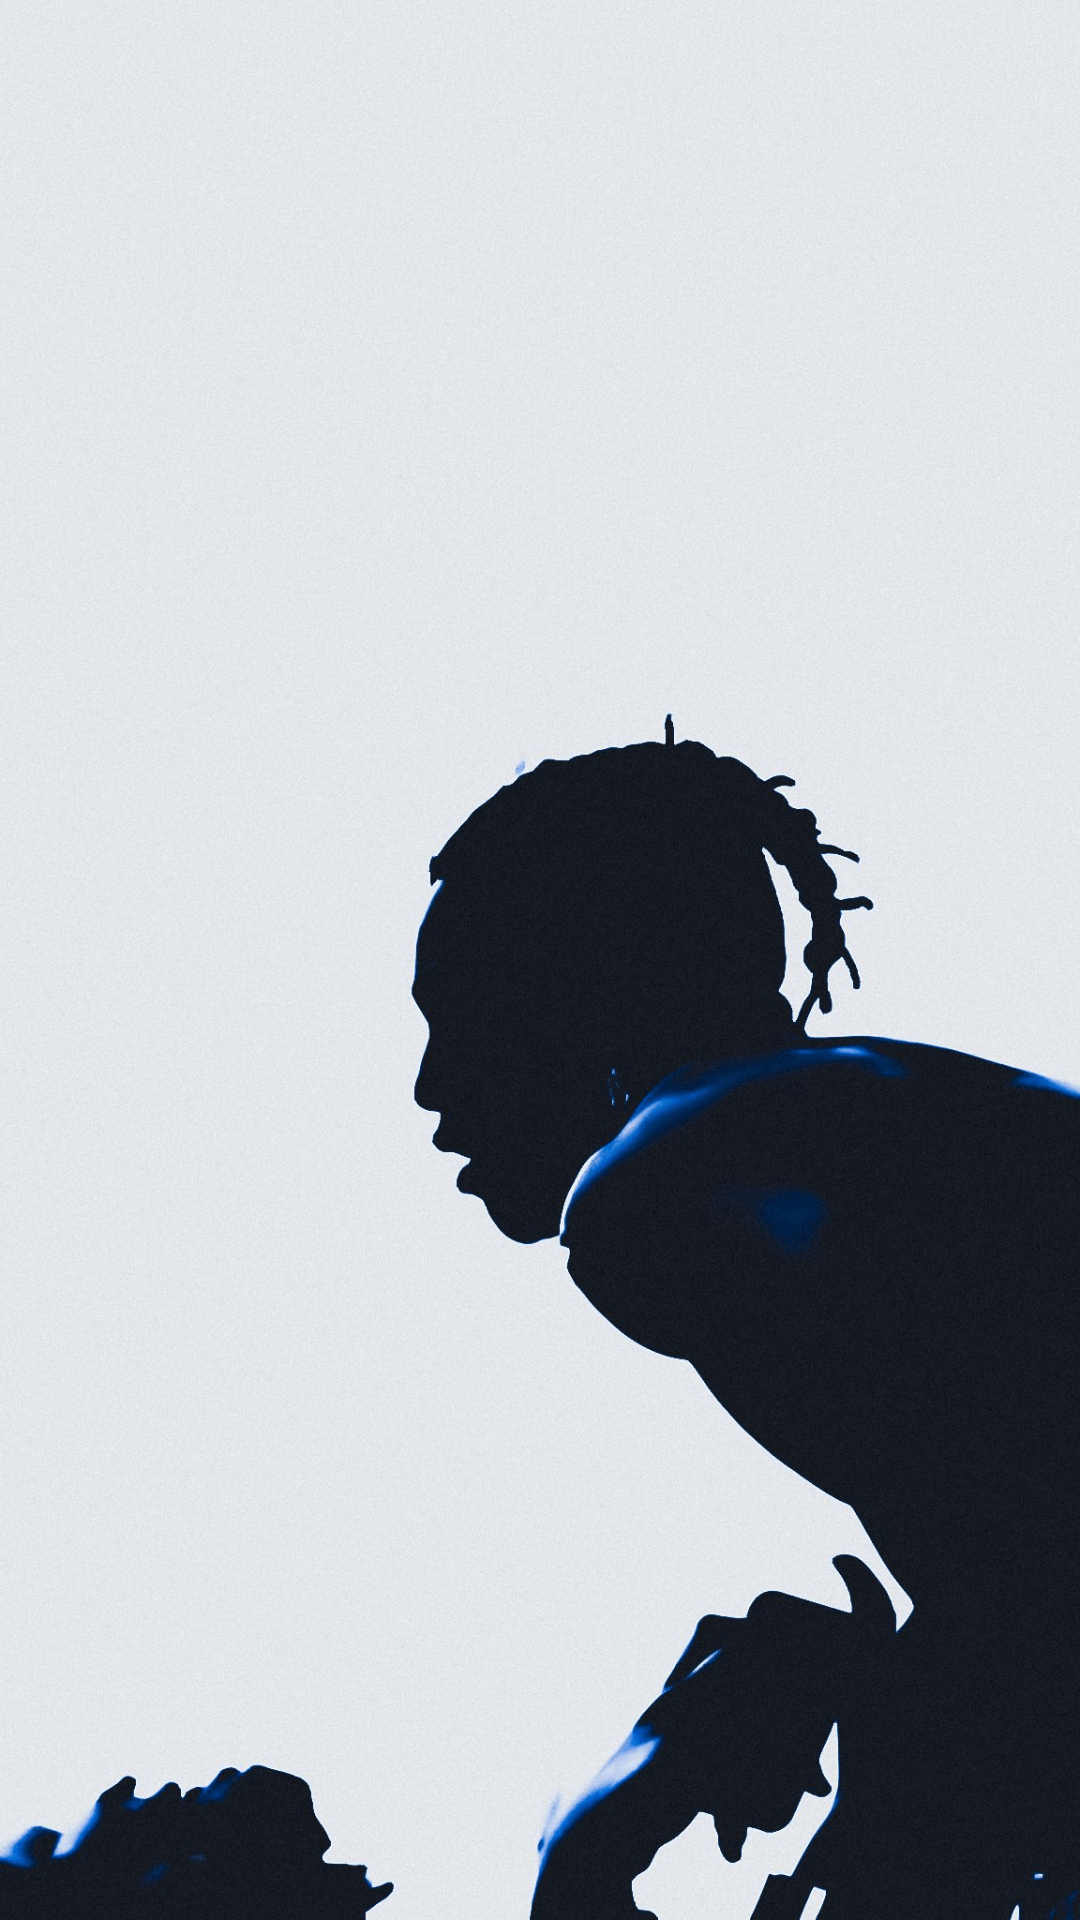 Cleanest Phone Wallpaper of X